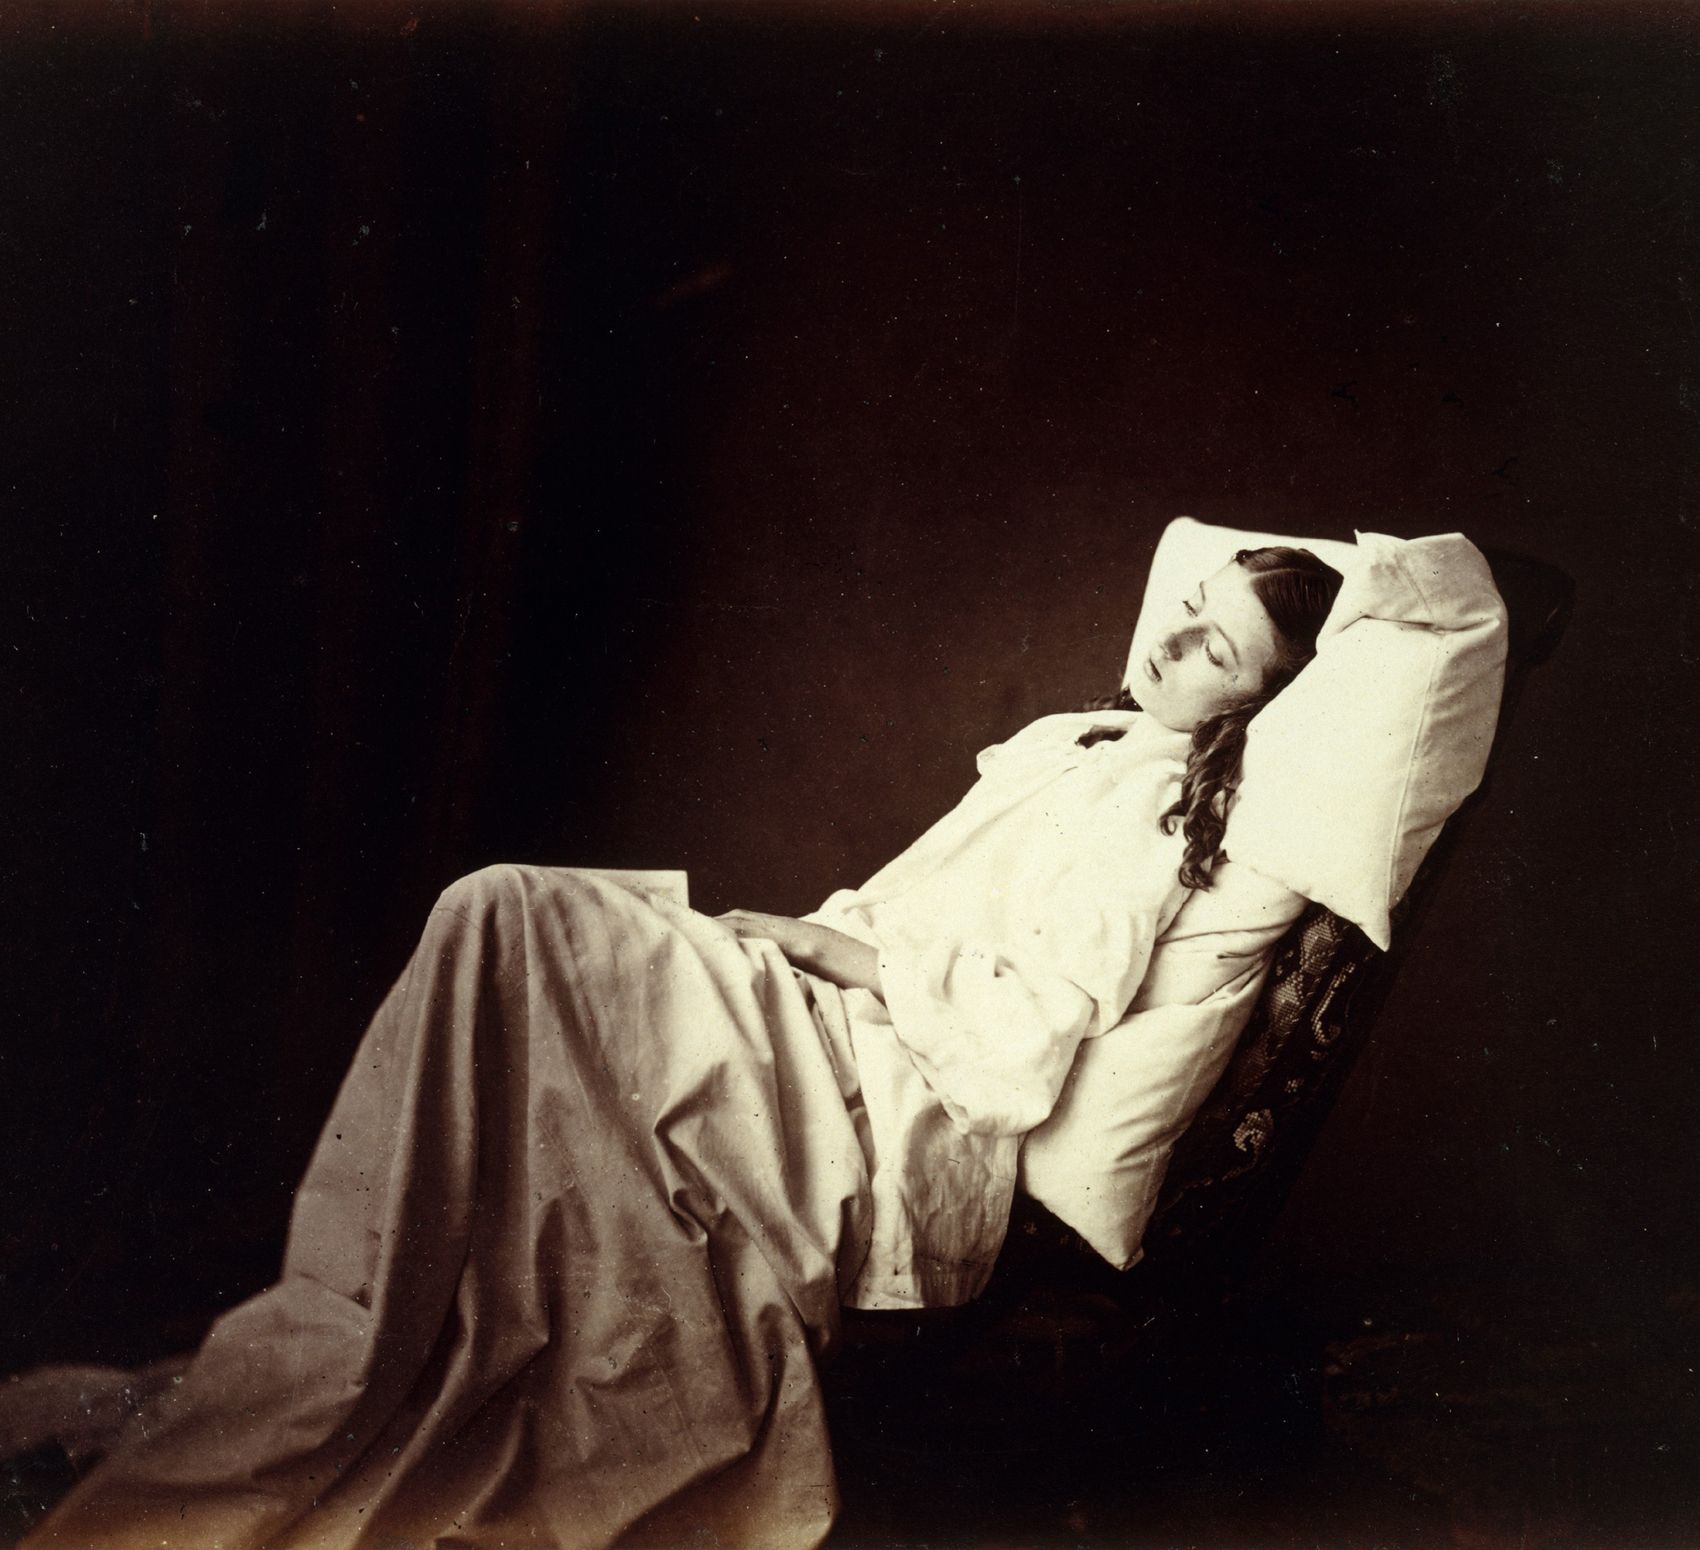 Antique photograph of a woman dressed in white nightgown reclining under a white sheet